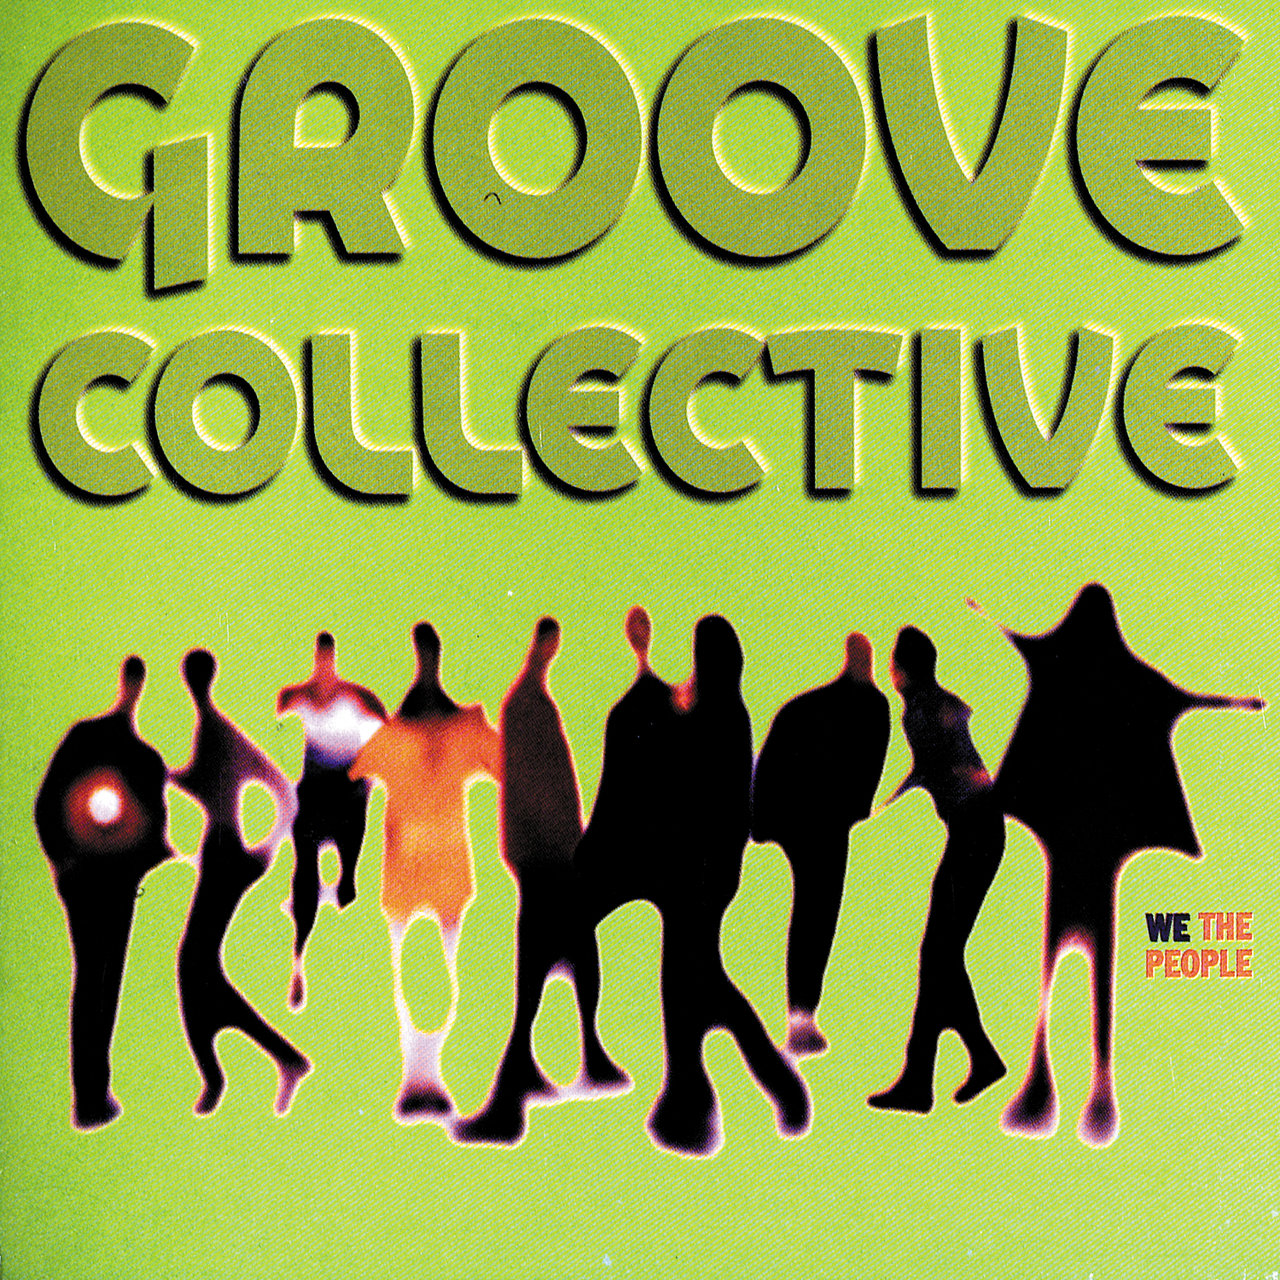 Groove Collective - Lift Off